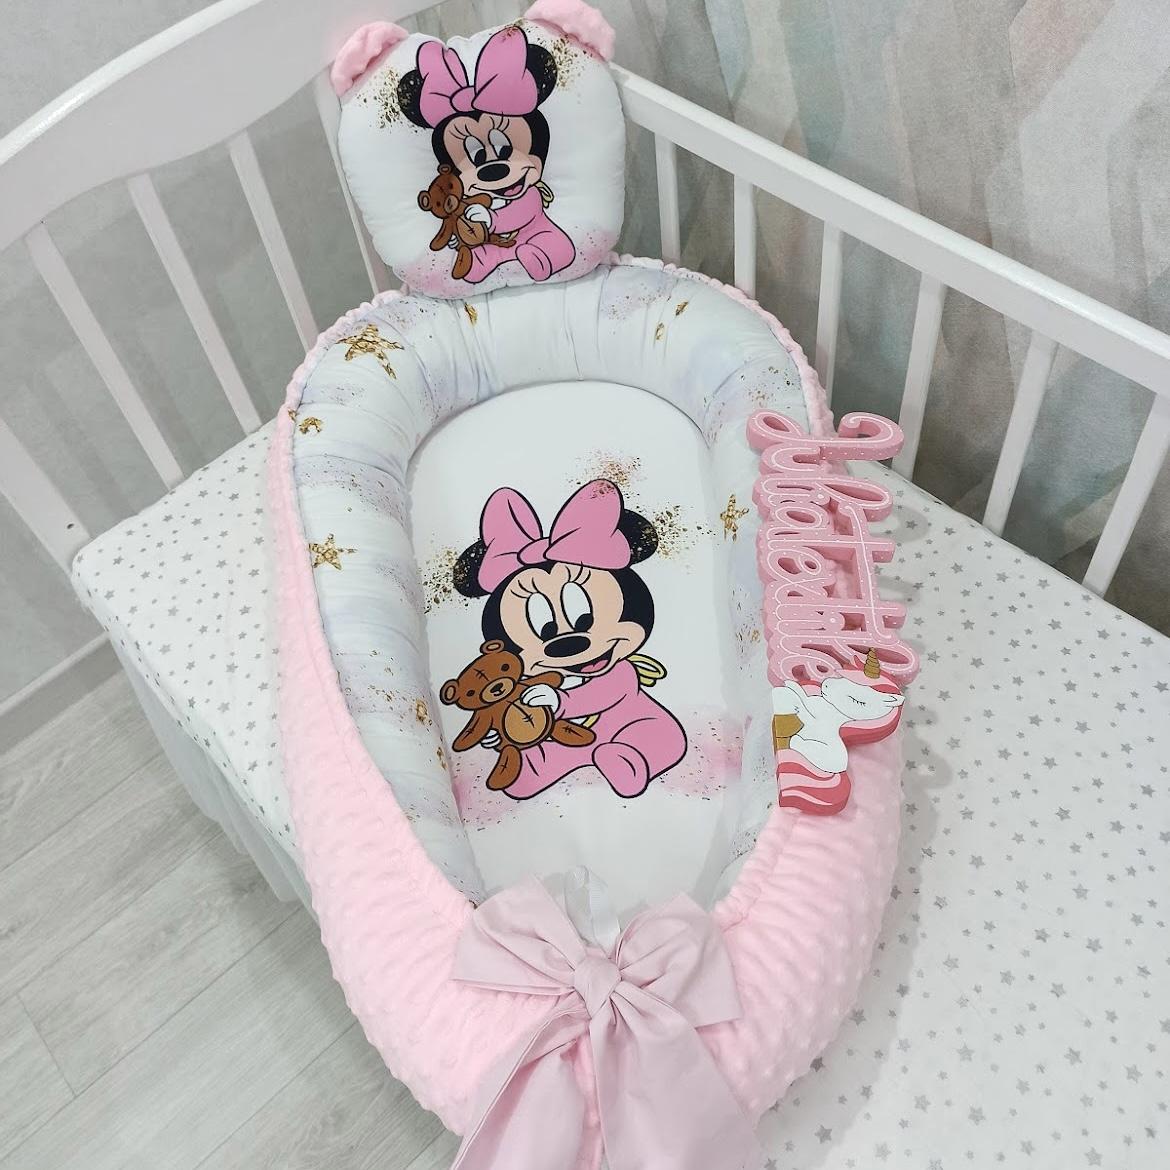 Reducer with minnie print with pink and white teddy bear